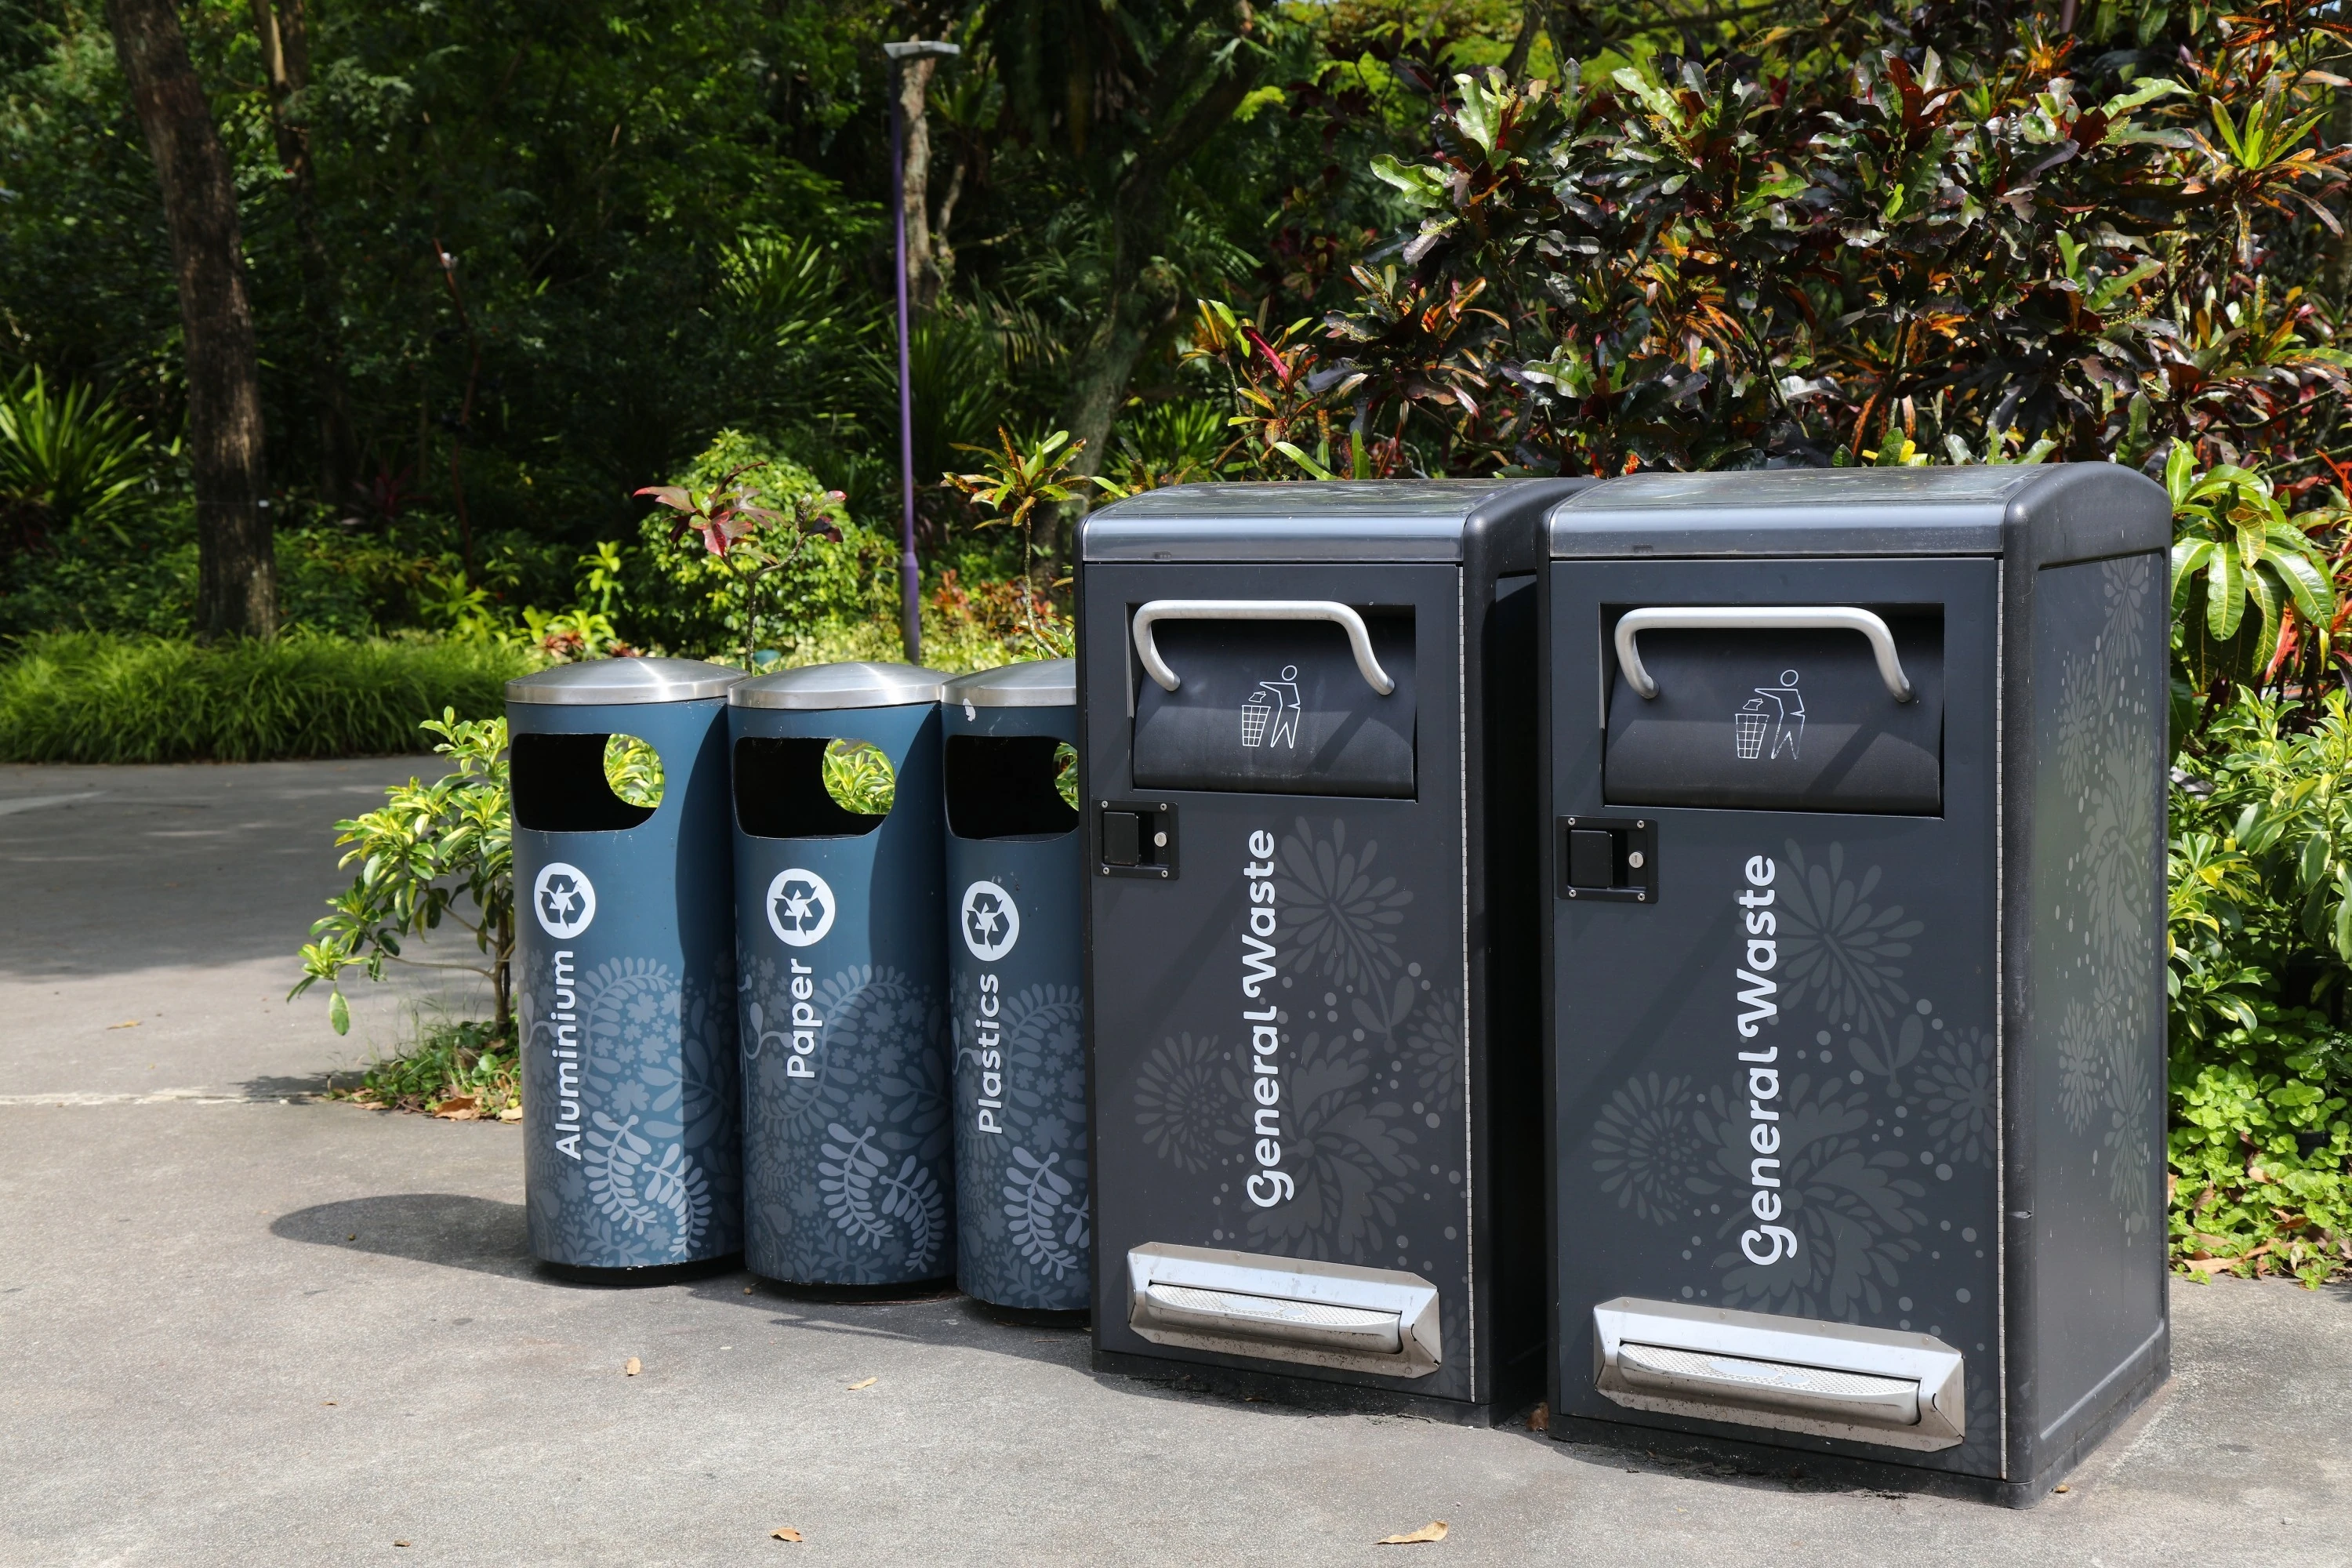 Understanding Singapore’s Waste Management and Recycling System